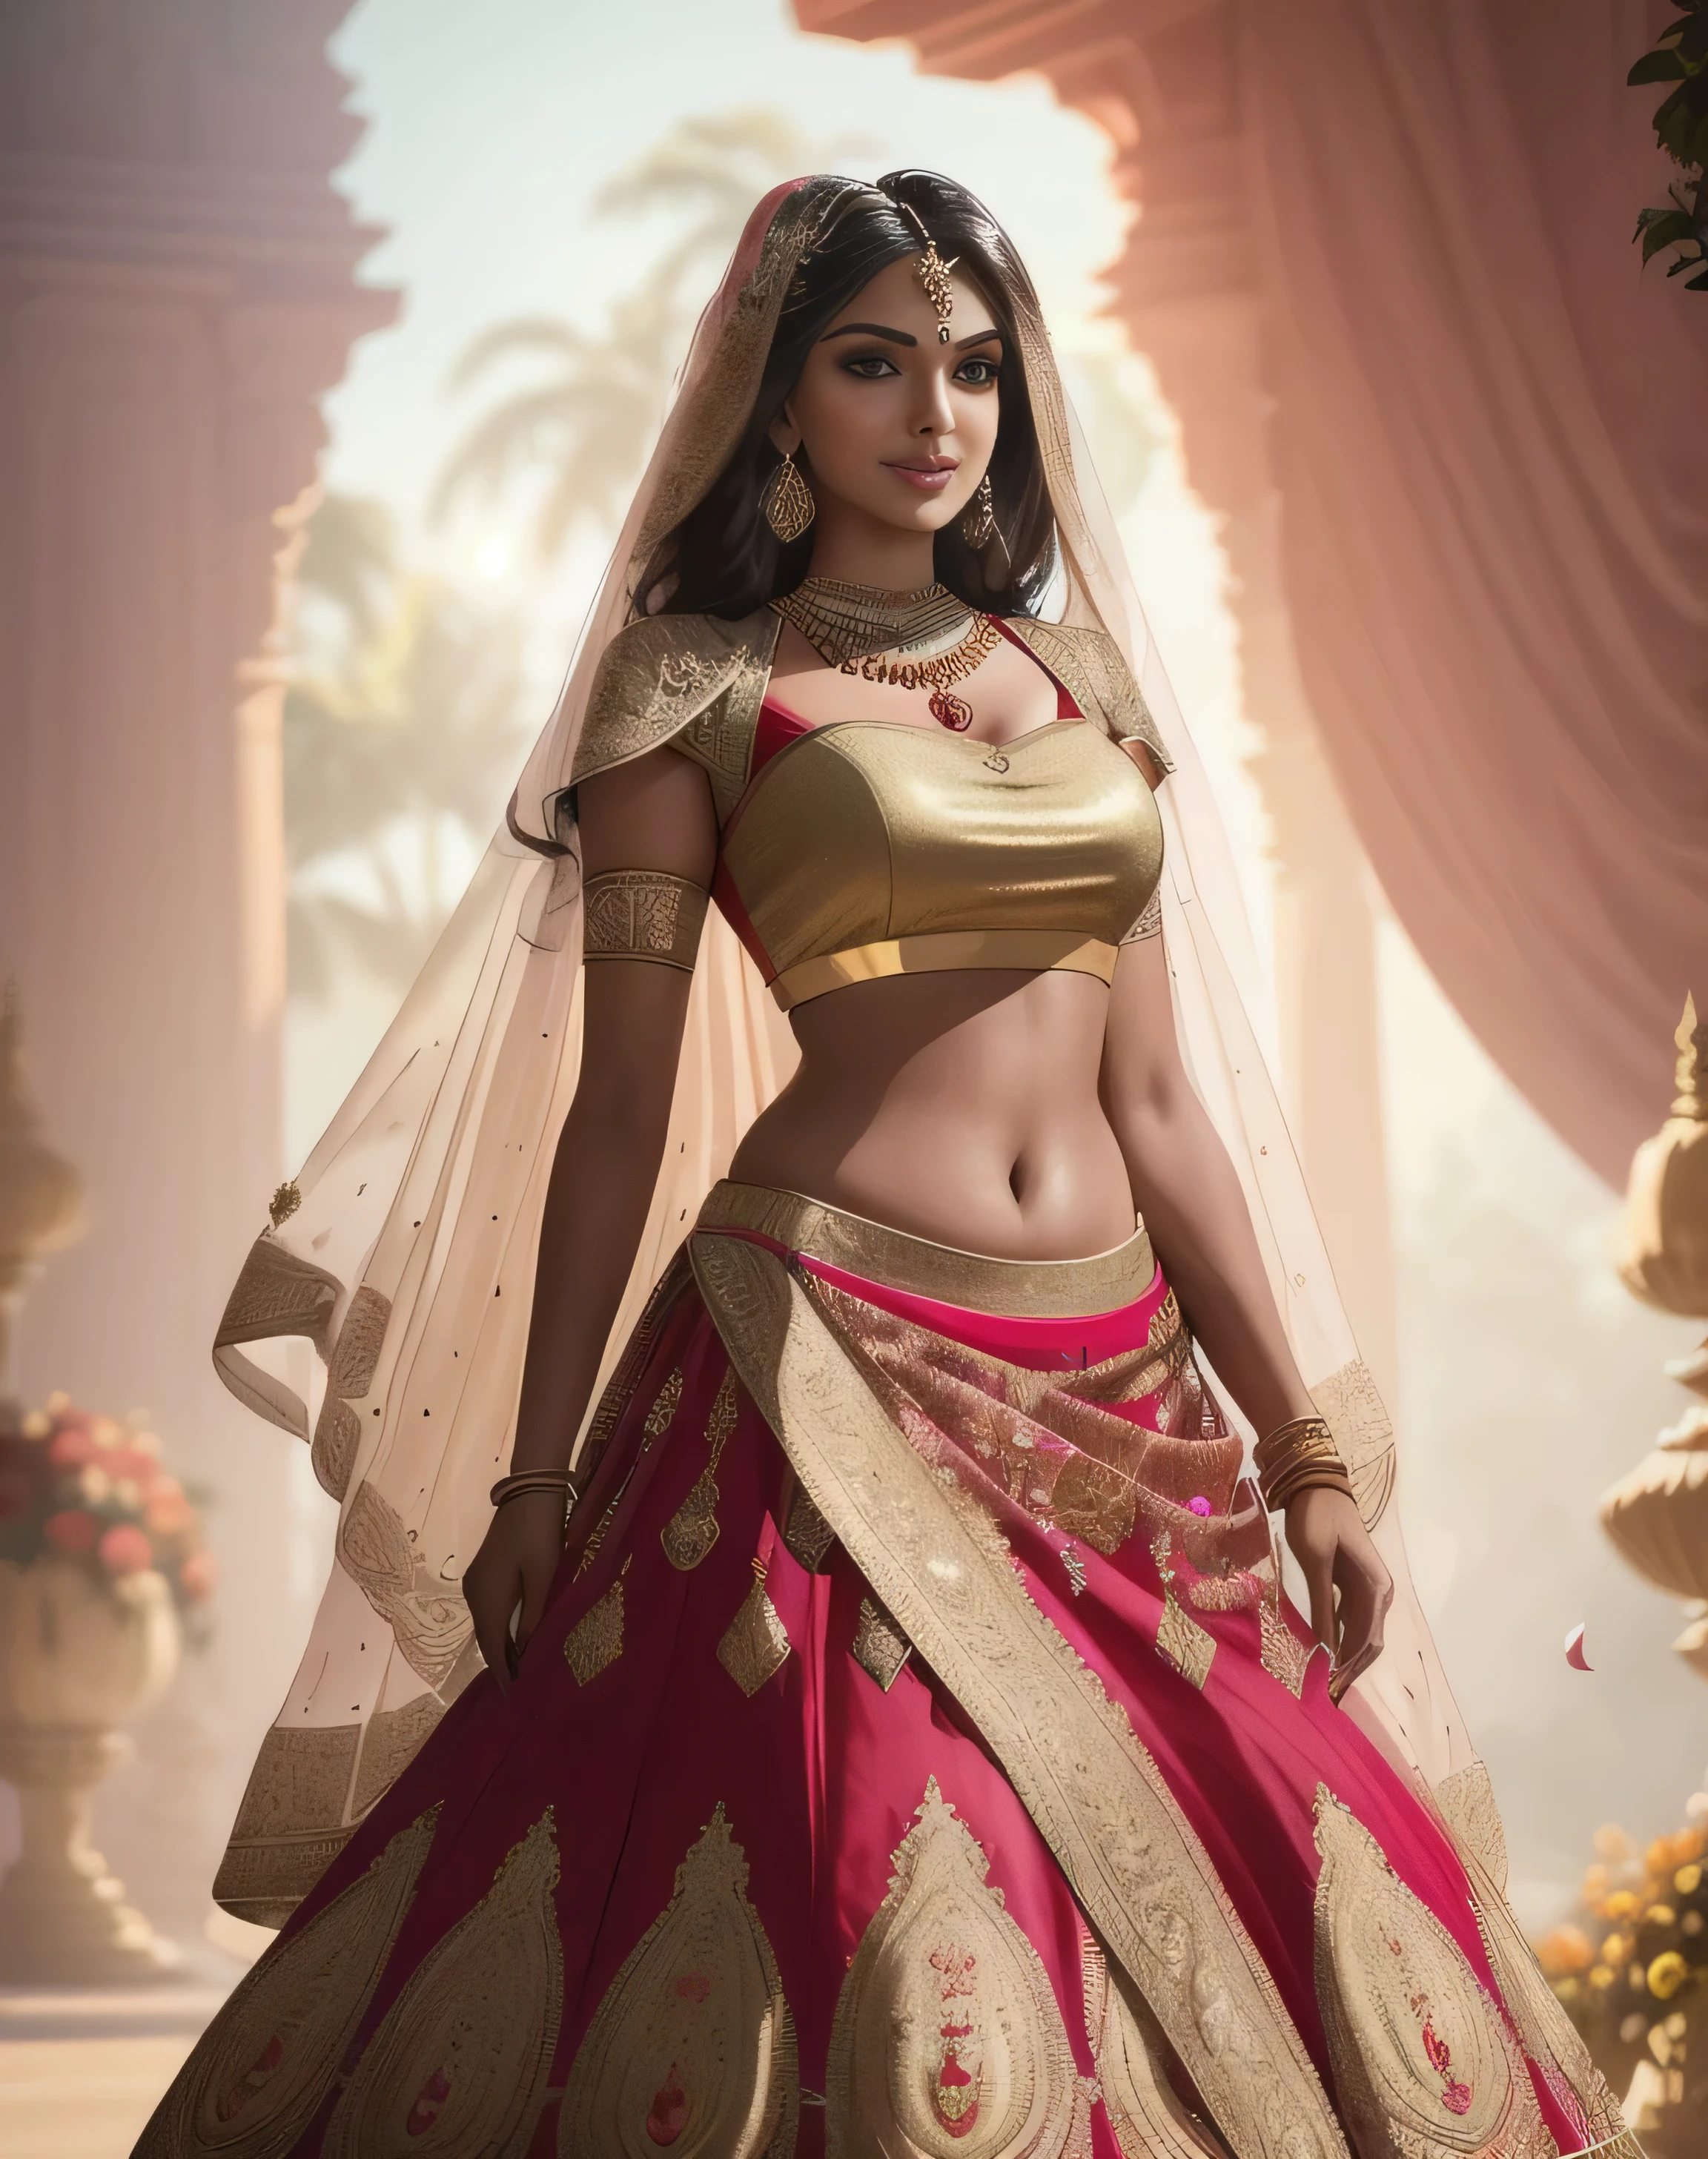 (masterpiece full length photography of a solo:1.2) alluring sexy tall curvy (18 yr old) Indian supermodel princess bride Amala Paul walking in (royal garden:1.3), (wearing stunning bridal red & gold lehenga & blouse:1.3). sheer dupatta, maximalism, (wedding flower decorations:1.3), (indian makeup & jewelry:1.2) long braided brown hair with highlights,, vivacious, lustful glance, exhilarated (beautiful detailed eyes:1.1) , (flirty bright smile:1.2), (intense dramatic afternoon light:1.4), backlit, key light, rim light, light rays, highly detailed, trending on artstation, paint splashes, rich color, abstract portrait, by Atey Ghailan